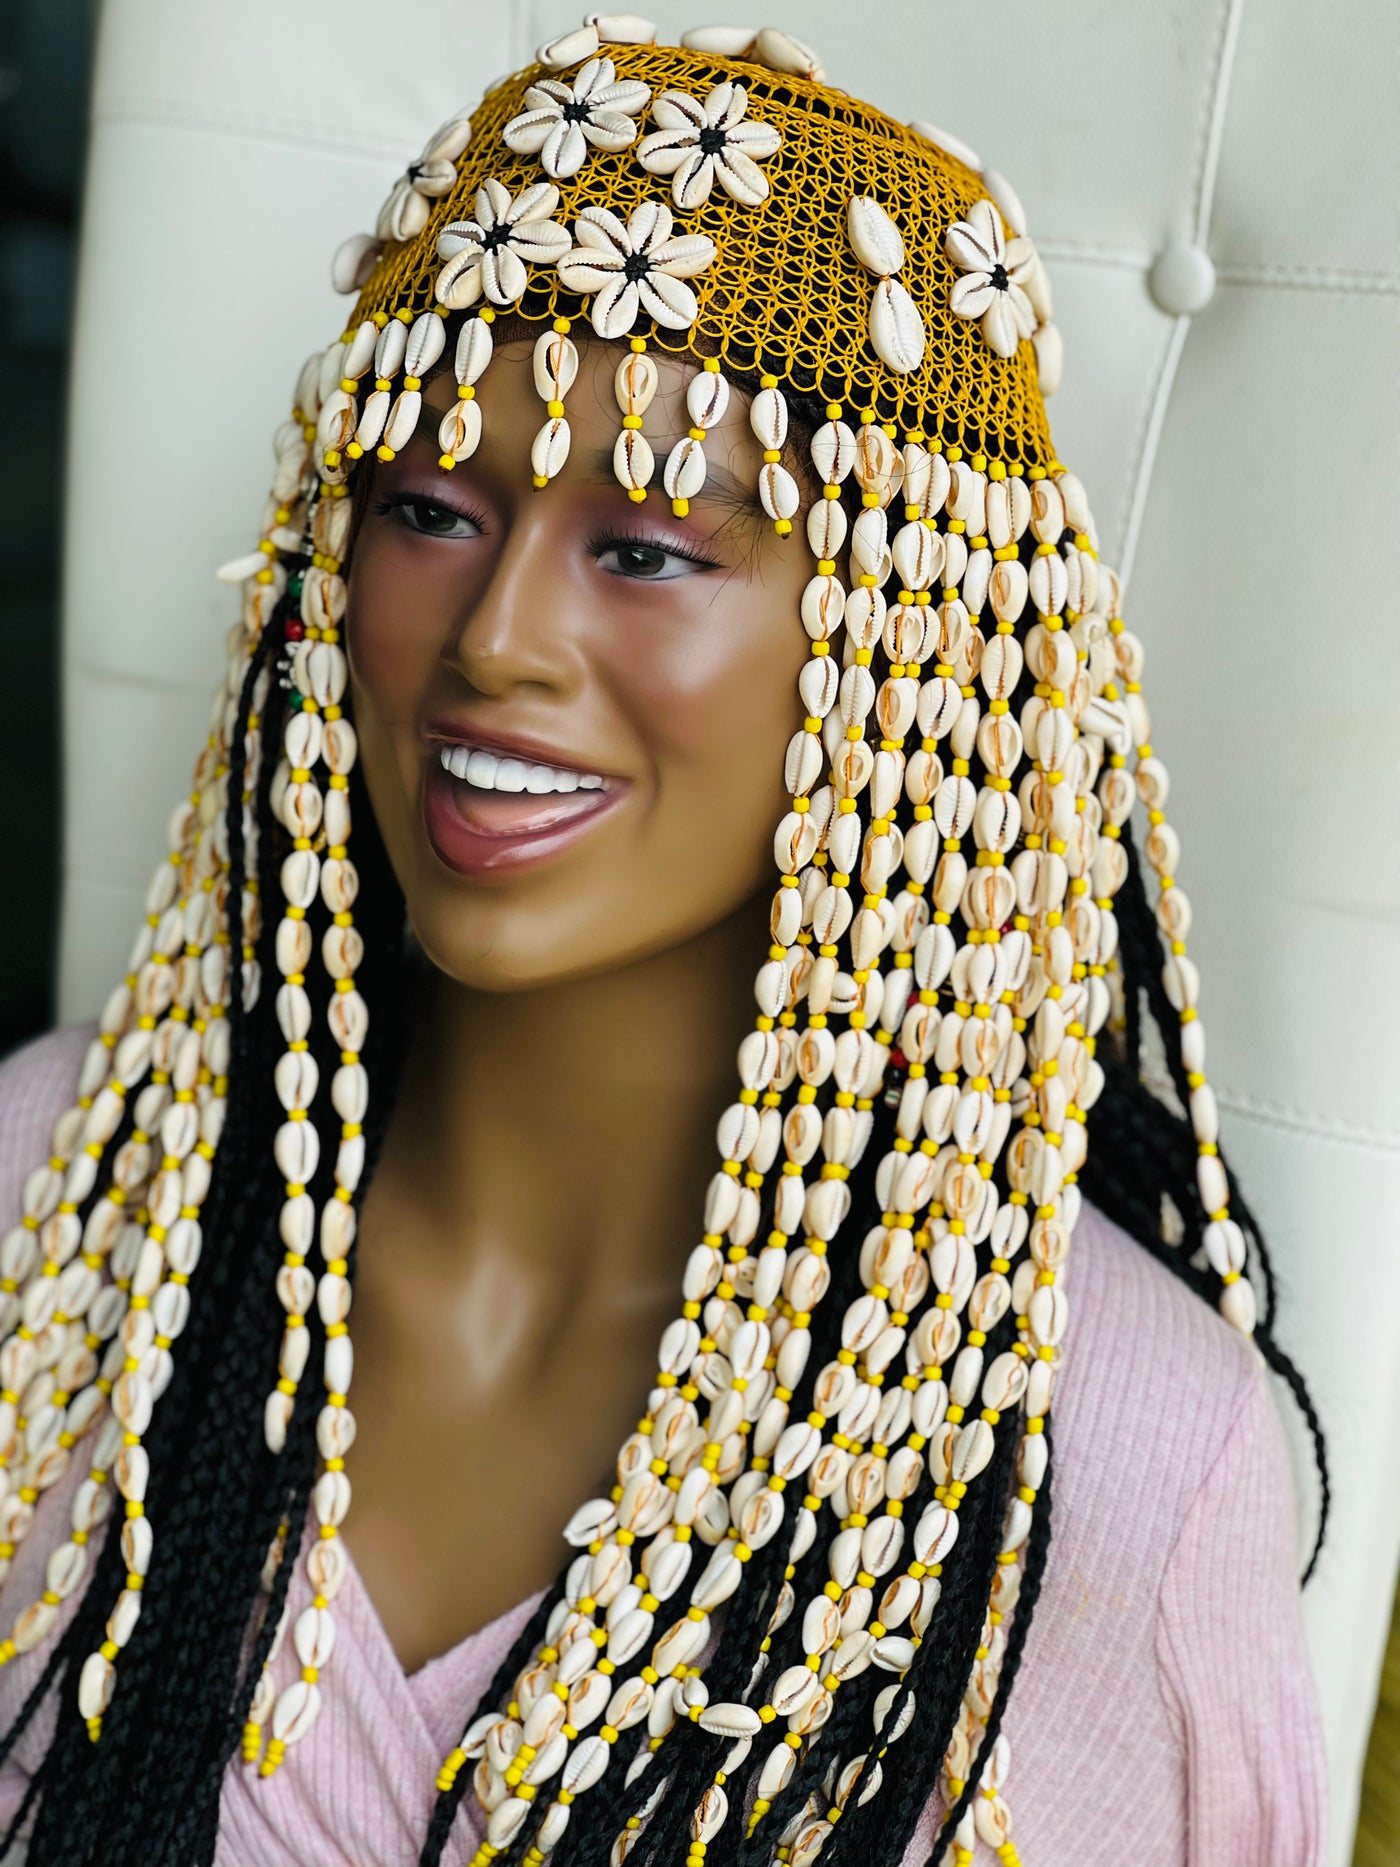 "Regal Reverie: Handmade Cleopatra-Inspired Cowrie Shells Head Piece - Embody African Royalty from Mali"